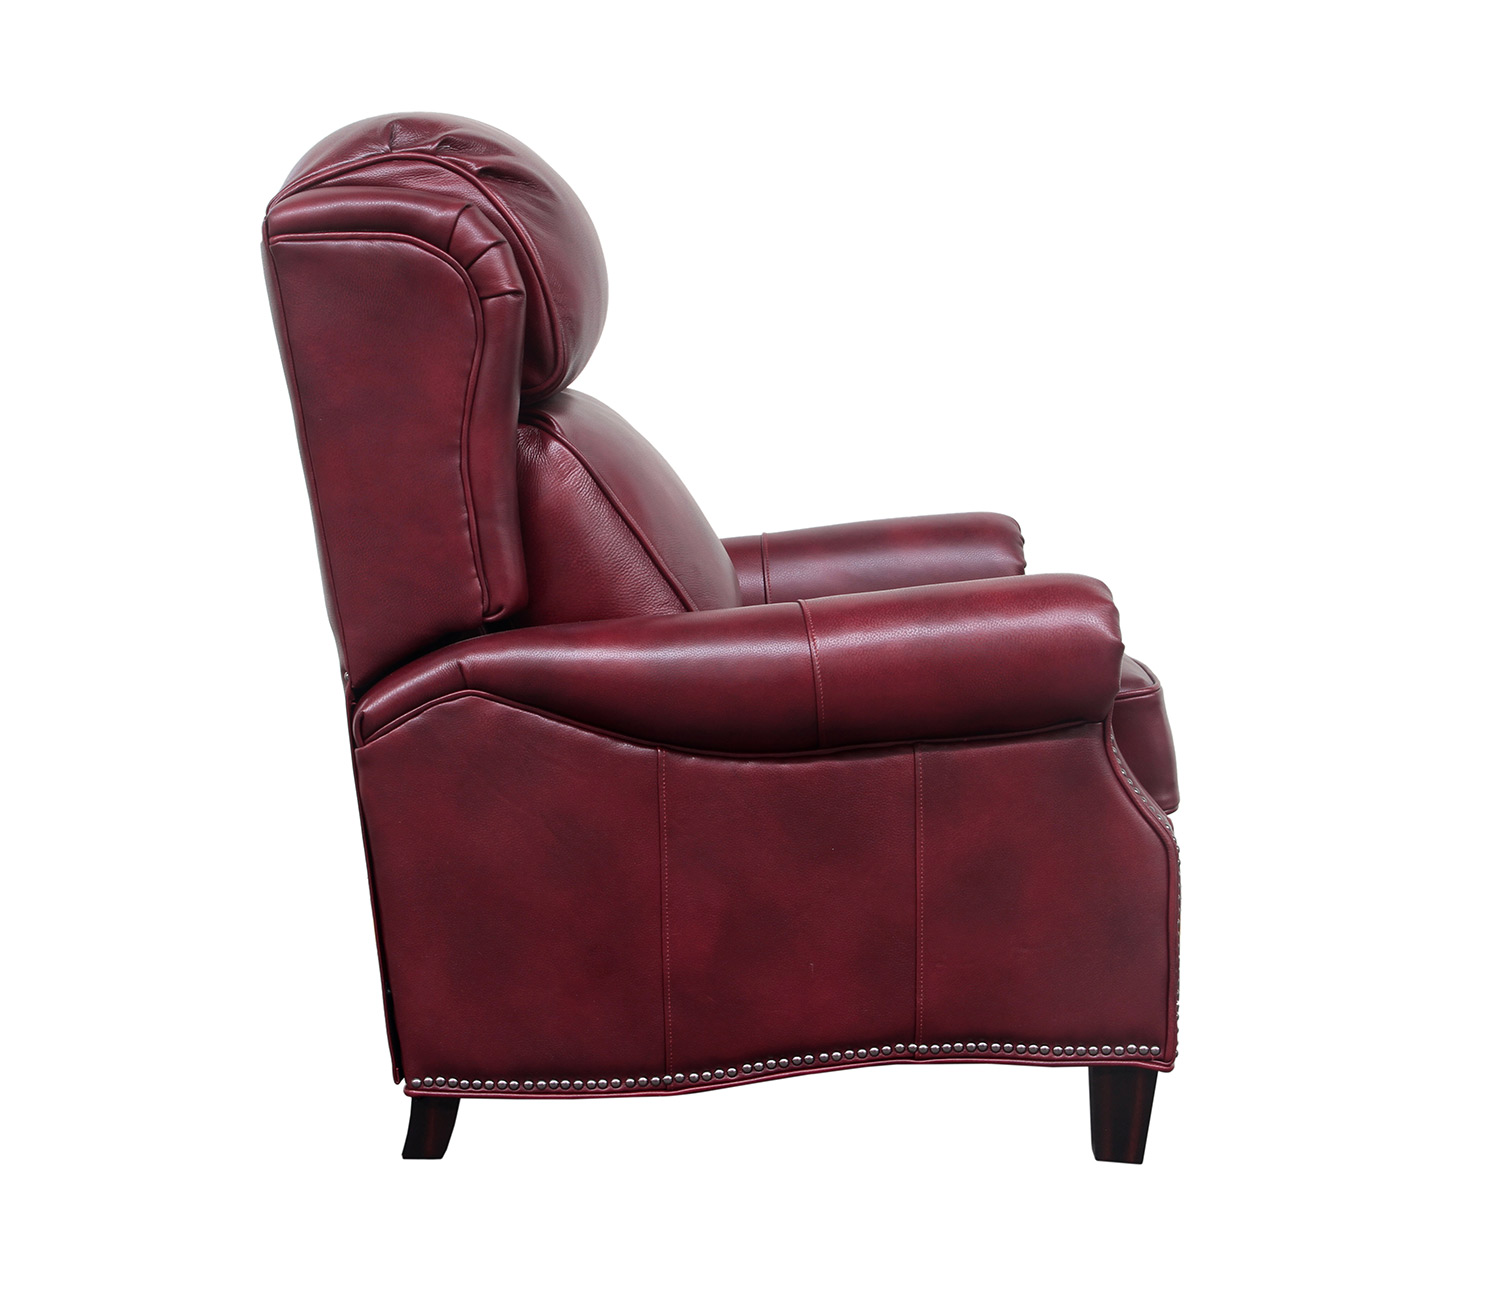 Barcalounger Meade Recliner Chair - Wenlock Carmine/all leather